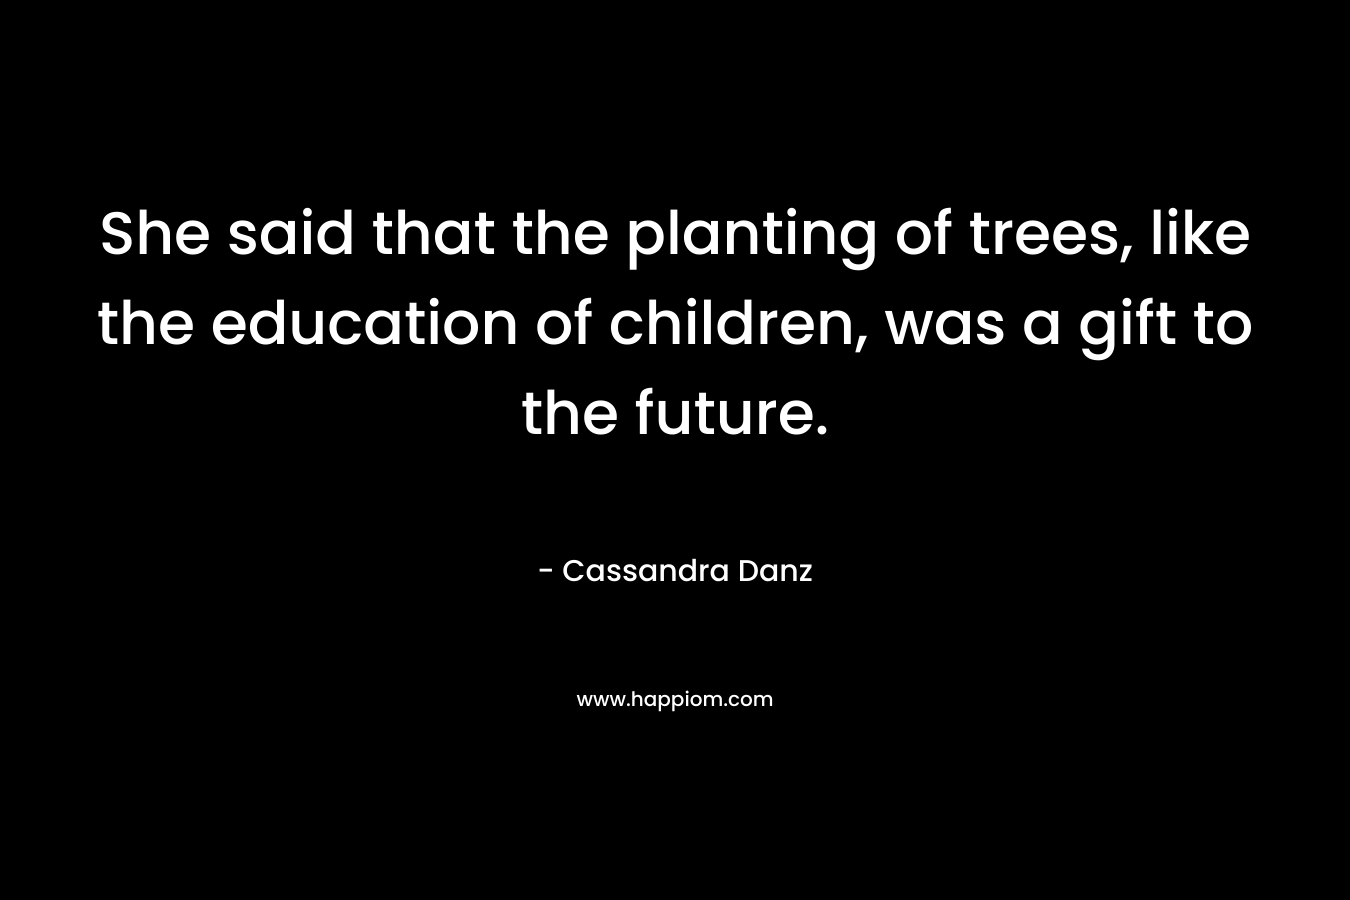 She said that the planting of trees, like the education of children, was a gift to the future. – Cassandra Danz